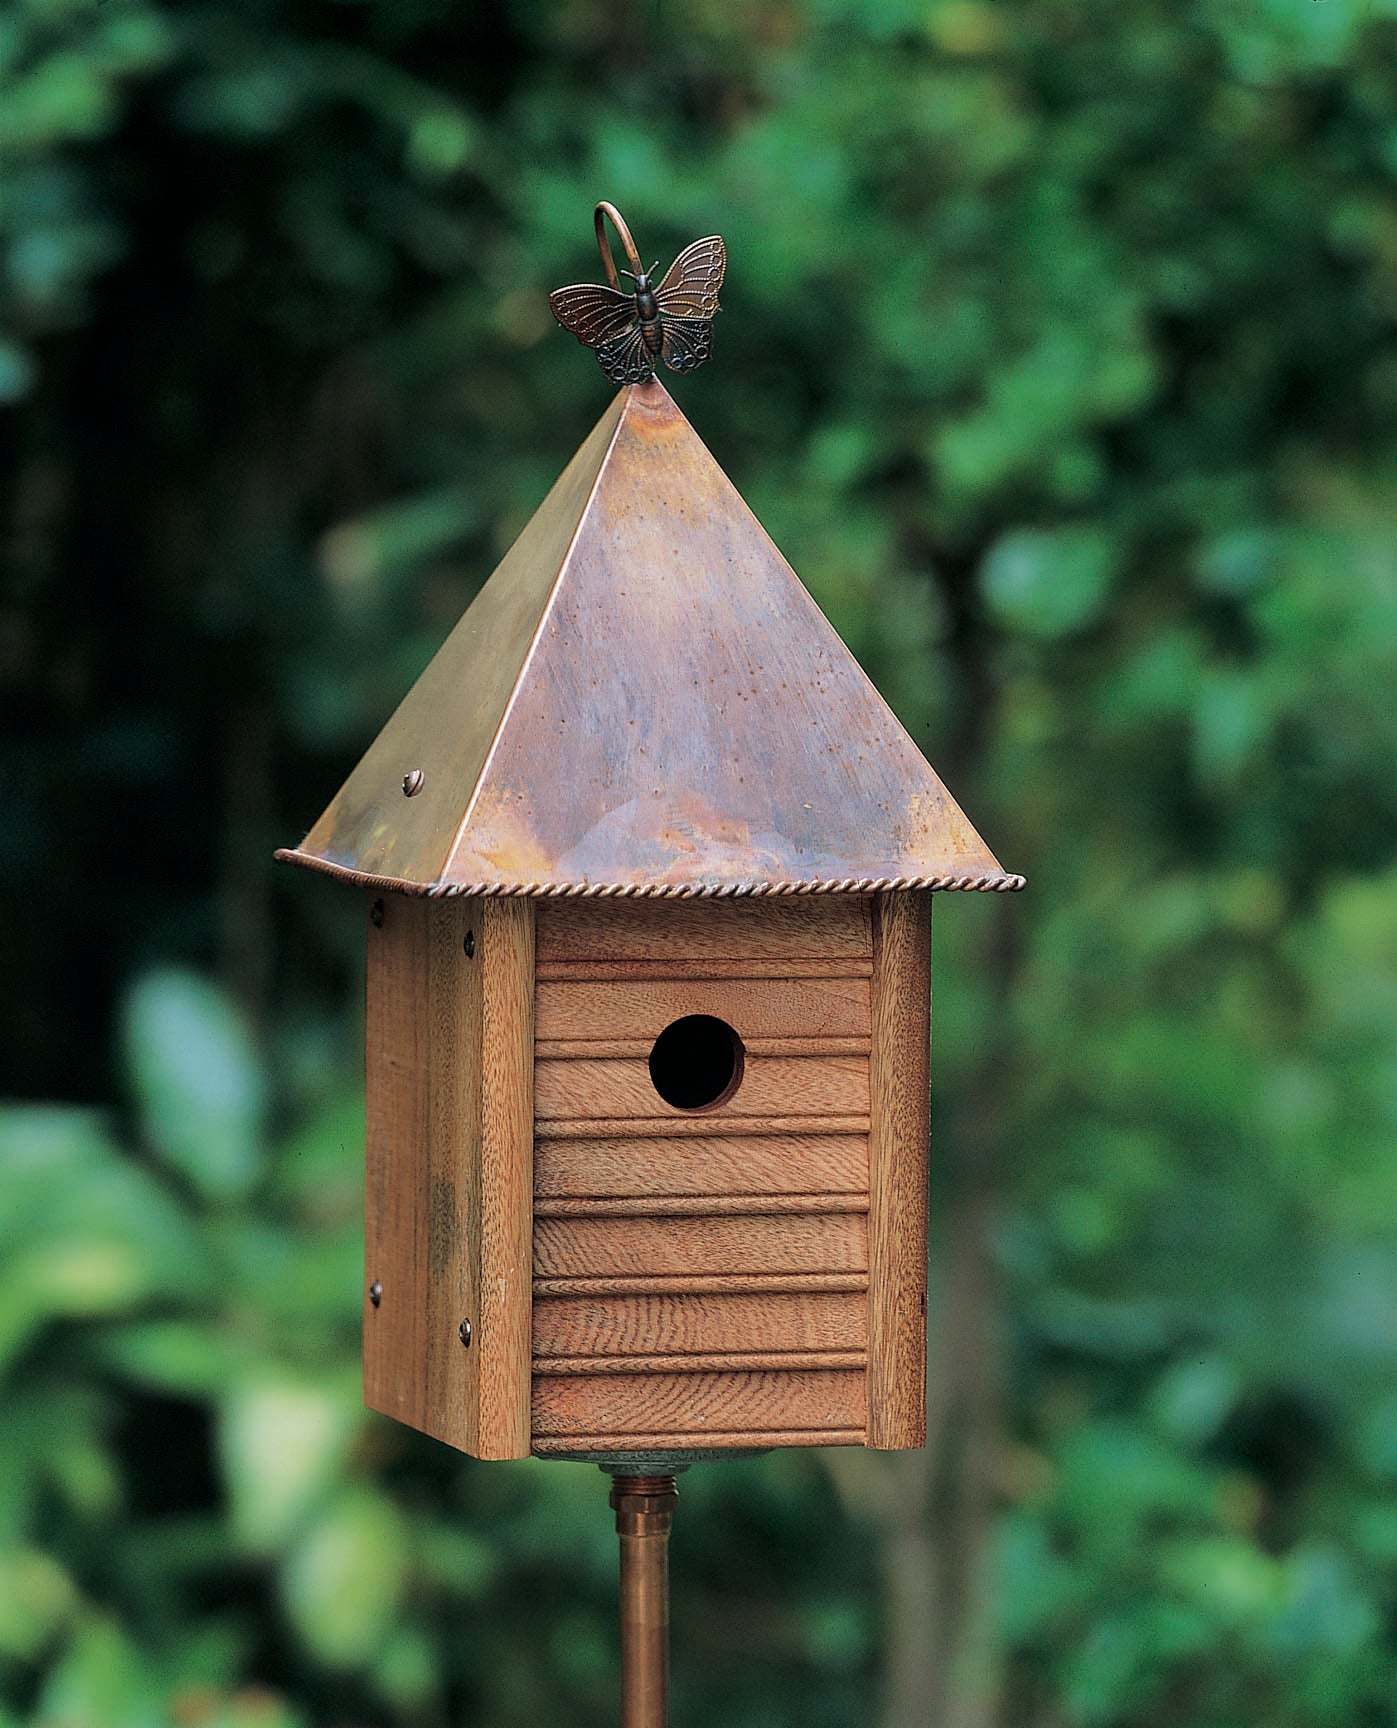 Mahogany Birdhouse with Copper Roof